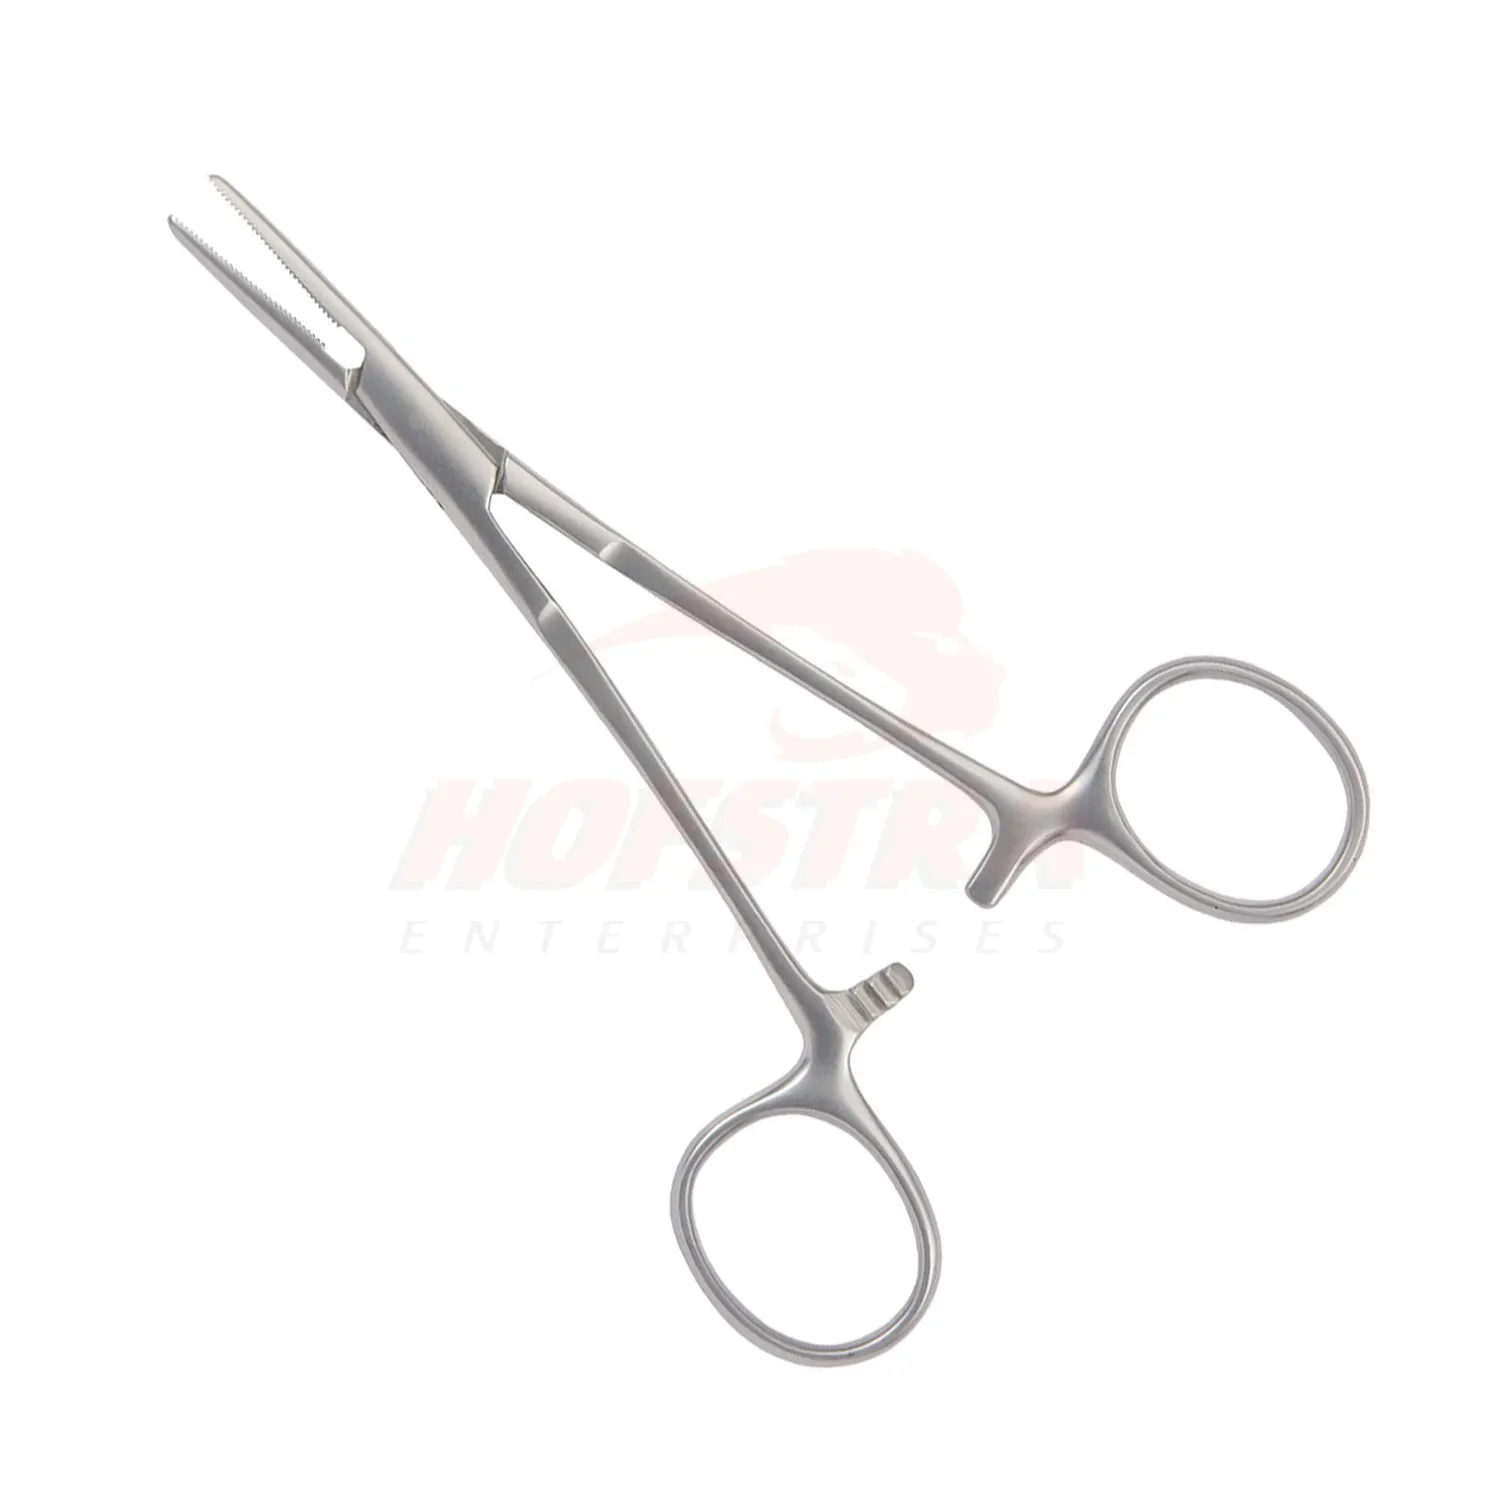 Stainless Steel Crile Artery Forceps Straight with Fully Serrated Jaws 140mm